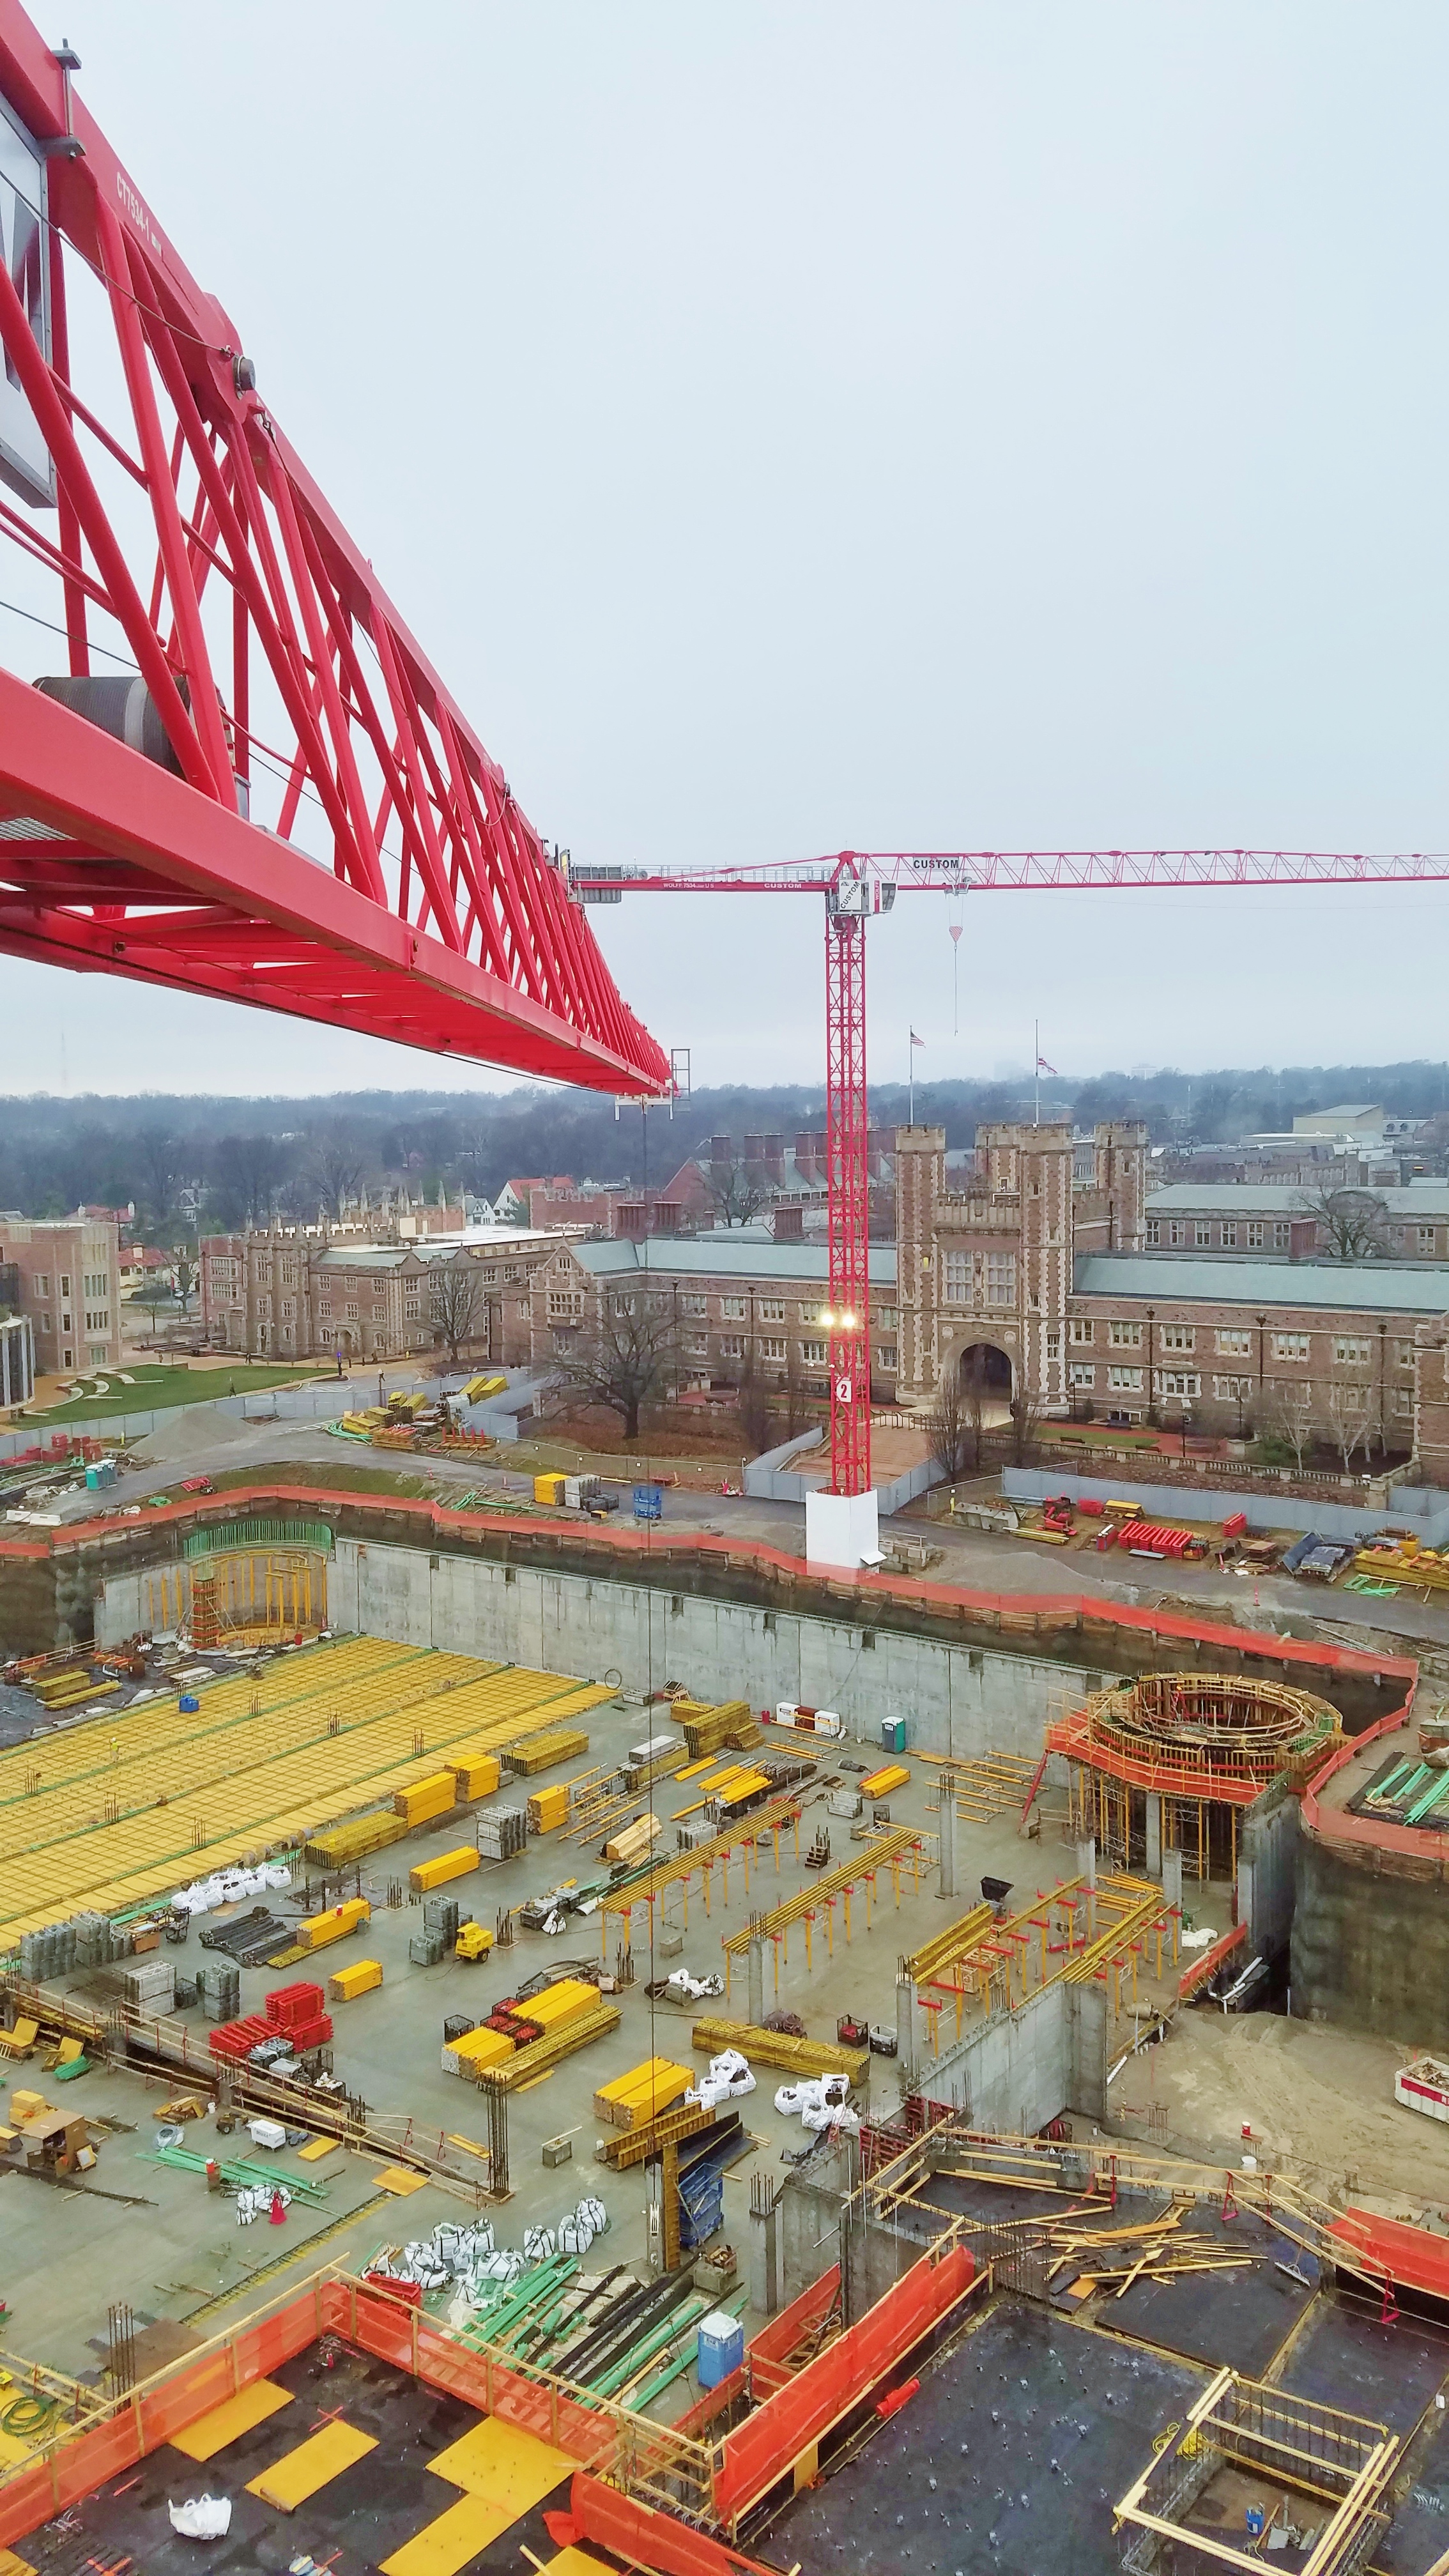 View from the top! Tower Crane 1 at the Wash U site shows deflection as it picks 10,000 lbs.